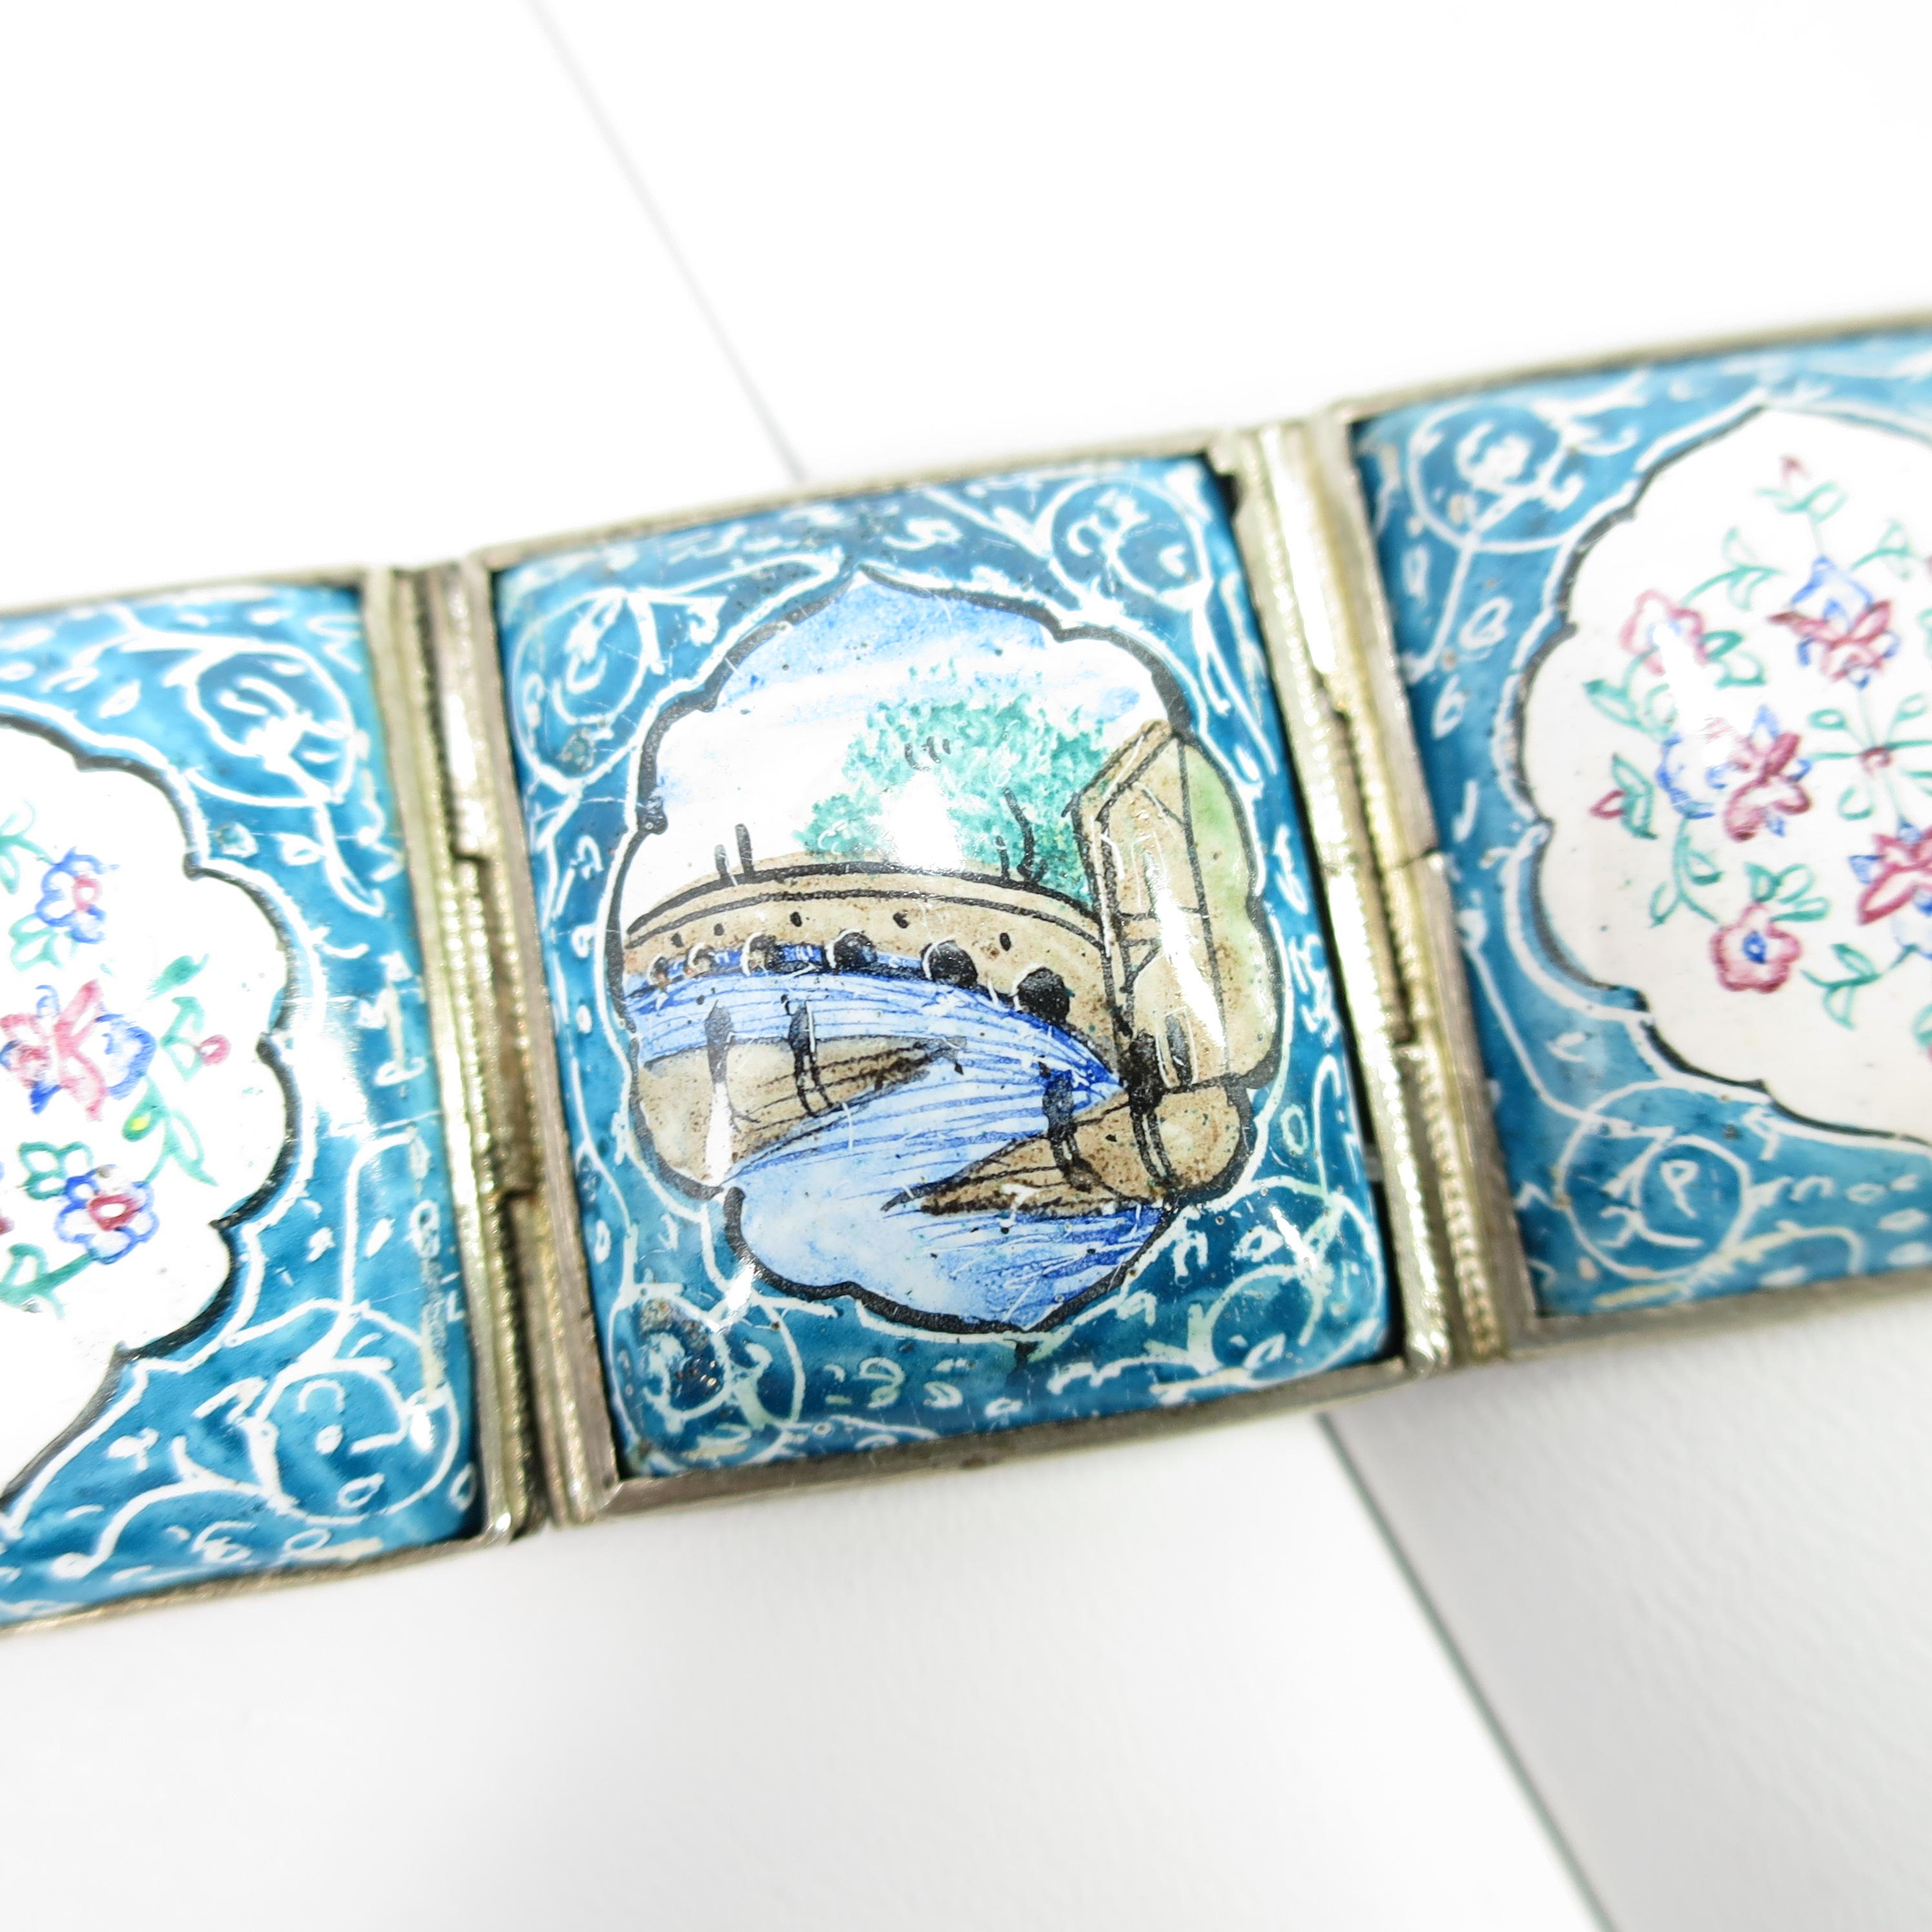 Persian Isfahan Silver Enamel Articulated Panel Bracelet, Artist-Signed 1930s For Sale 1